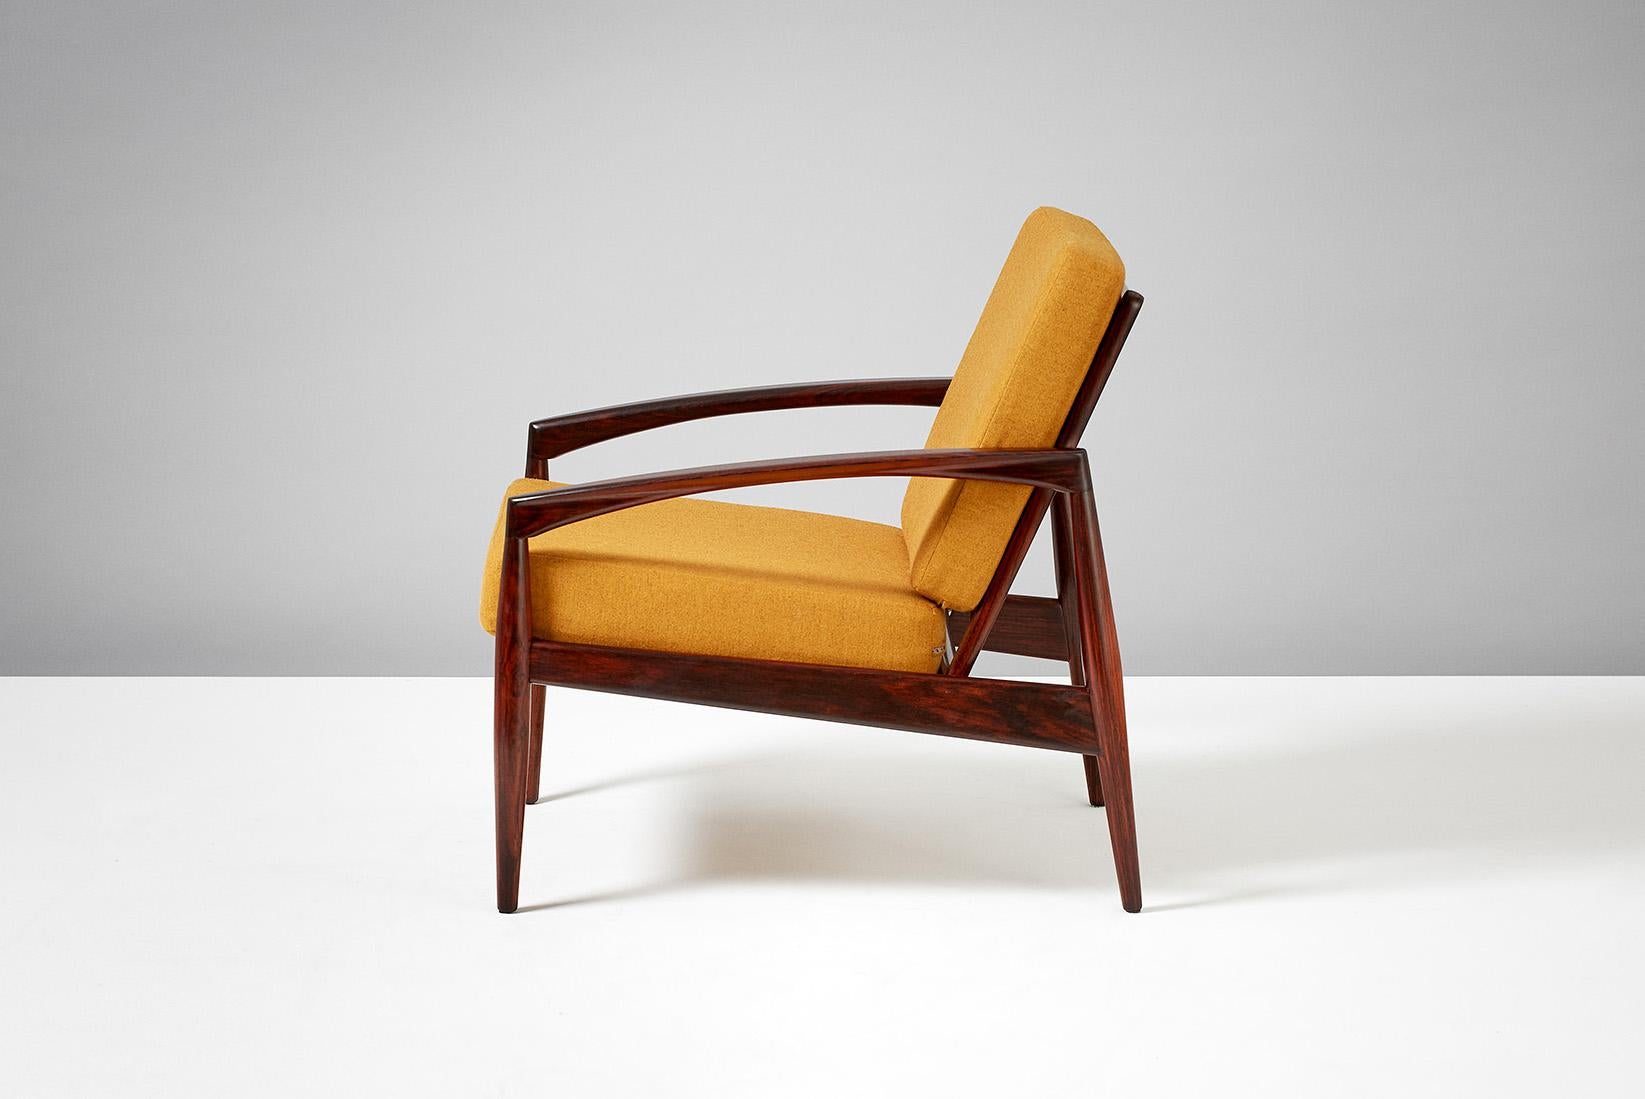 Kai Kristiansen

Paper Knife lounge chair, 1955.

Produced by Magnus Olesen, Denmark in solid rosewood. New cushions upholstered in yellow melange wool fabric from Kvadrat, Denmark. 

 

 